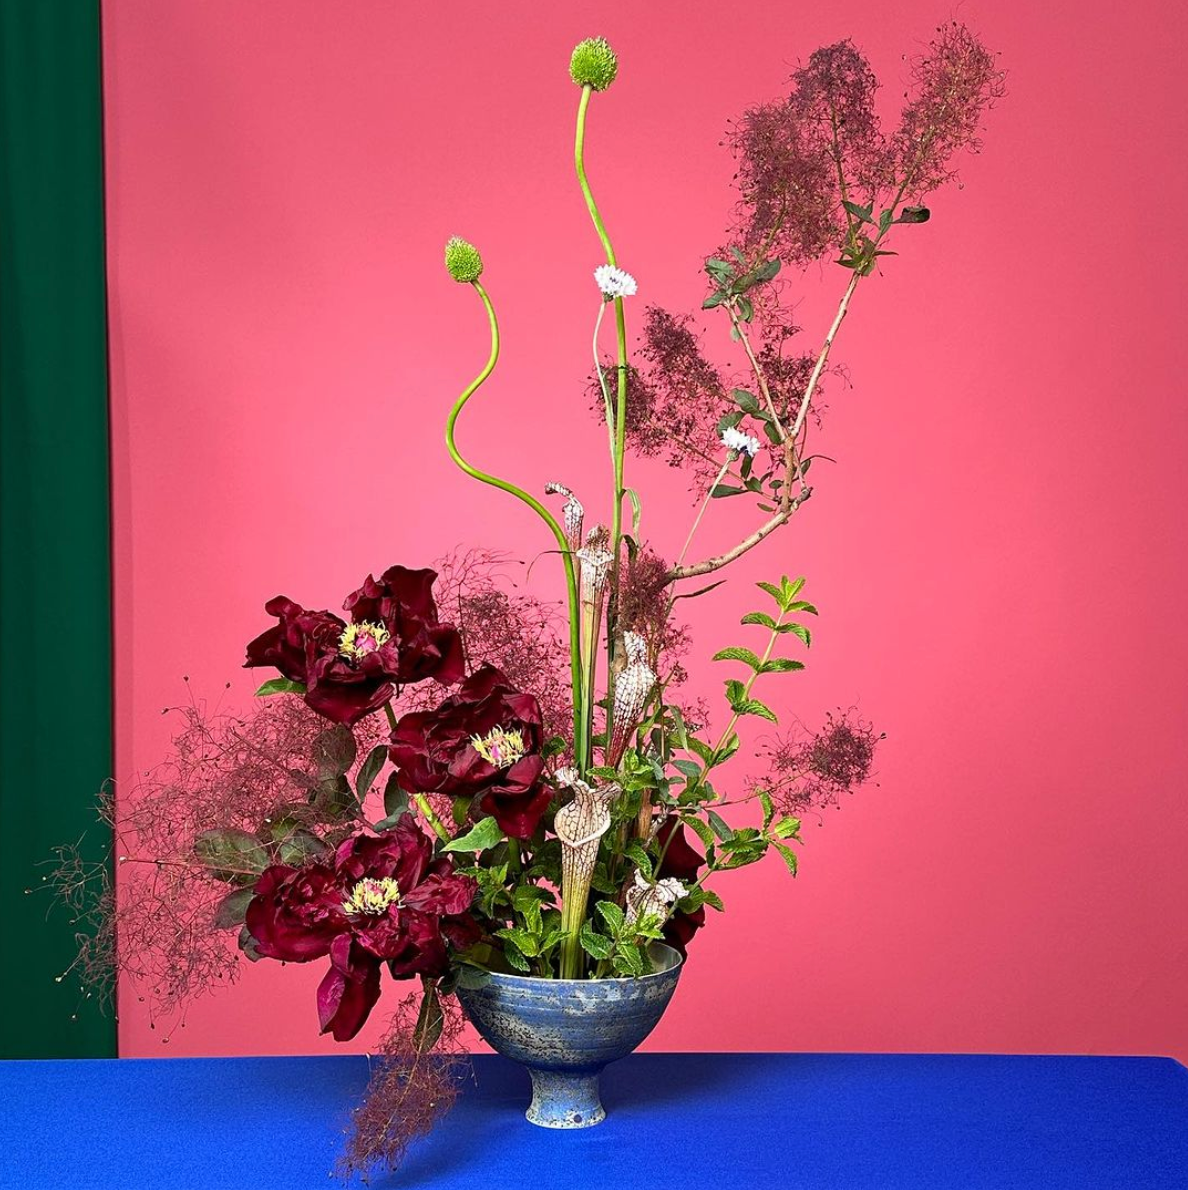 Floral Arranging Workshop with Maurice Harris of Bloom & Plume